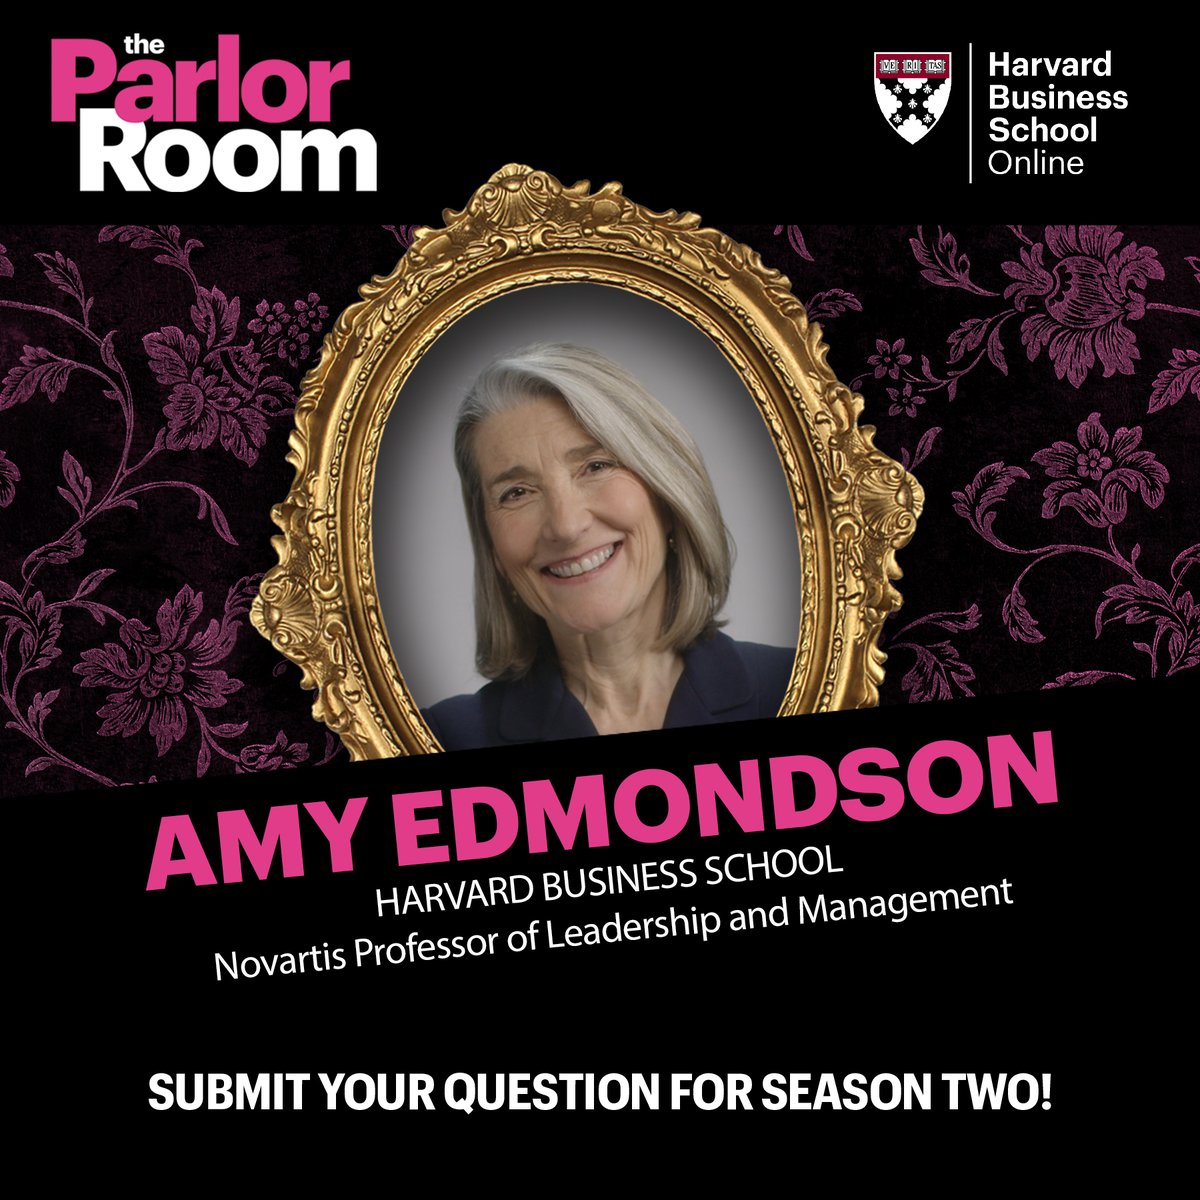 Soon, we'll be chatting with @AmyCEdmondson for season 2 of #TheParlorRoom podcast! If you have a question for Professor Edmondson, just drop it in the comments. You might get it answered on the show! ✨